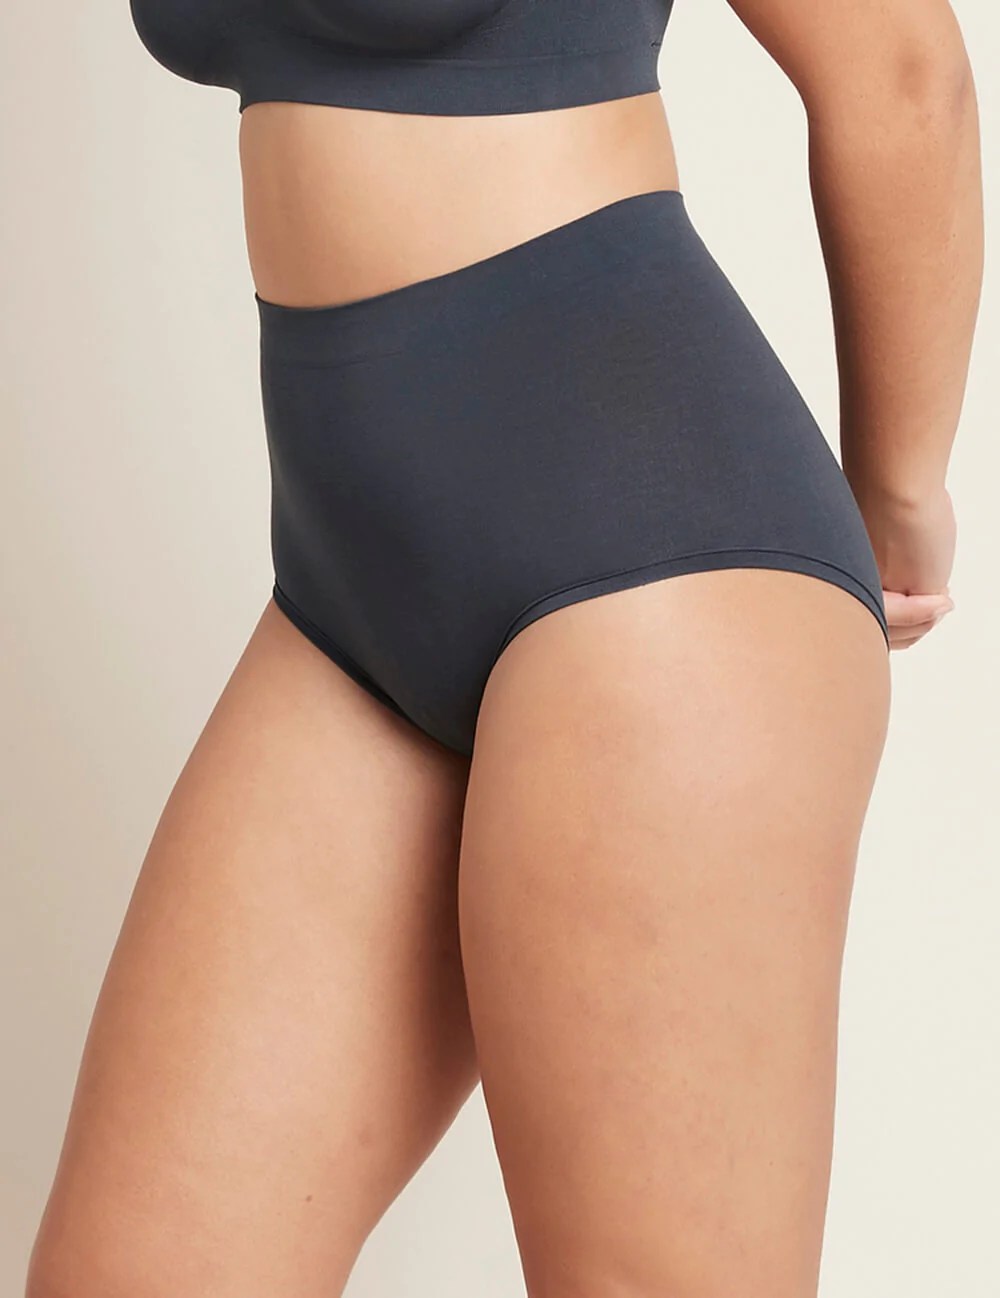 boody boyleg brief in navy blue, a pair of gynecologist approved underwear